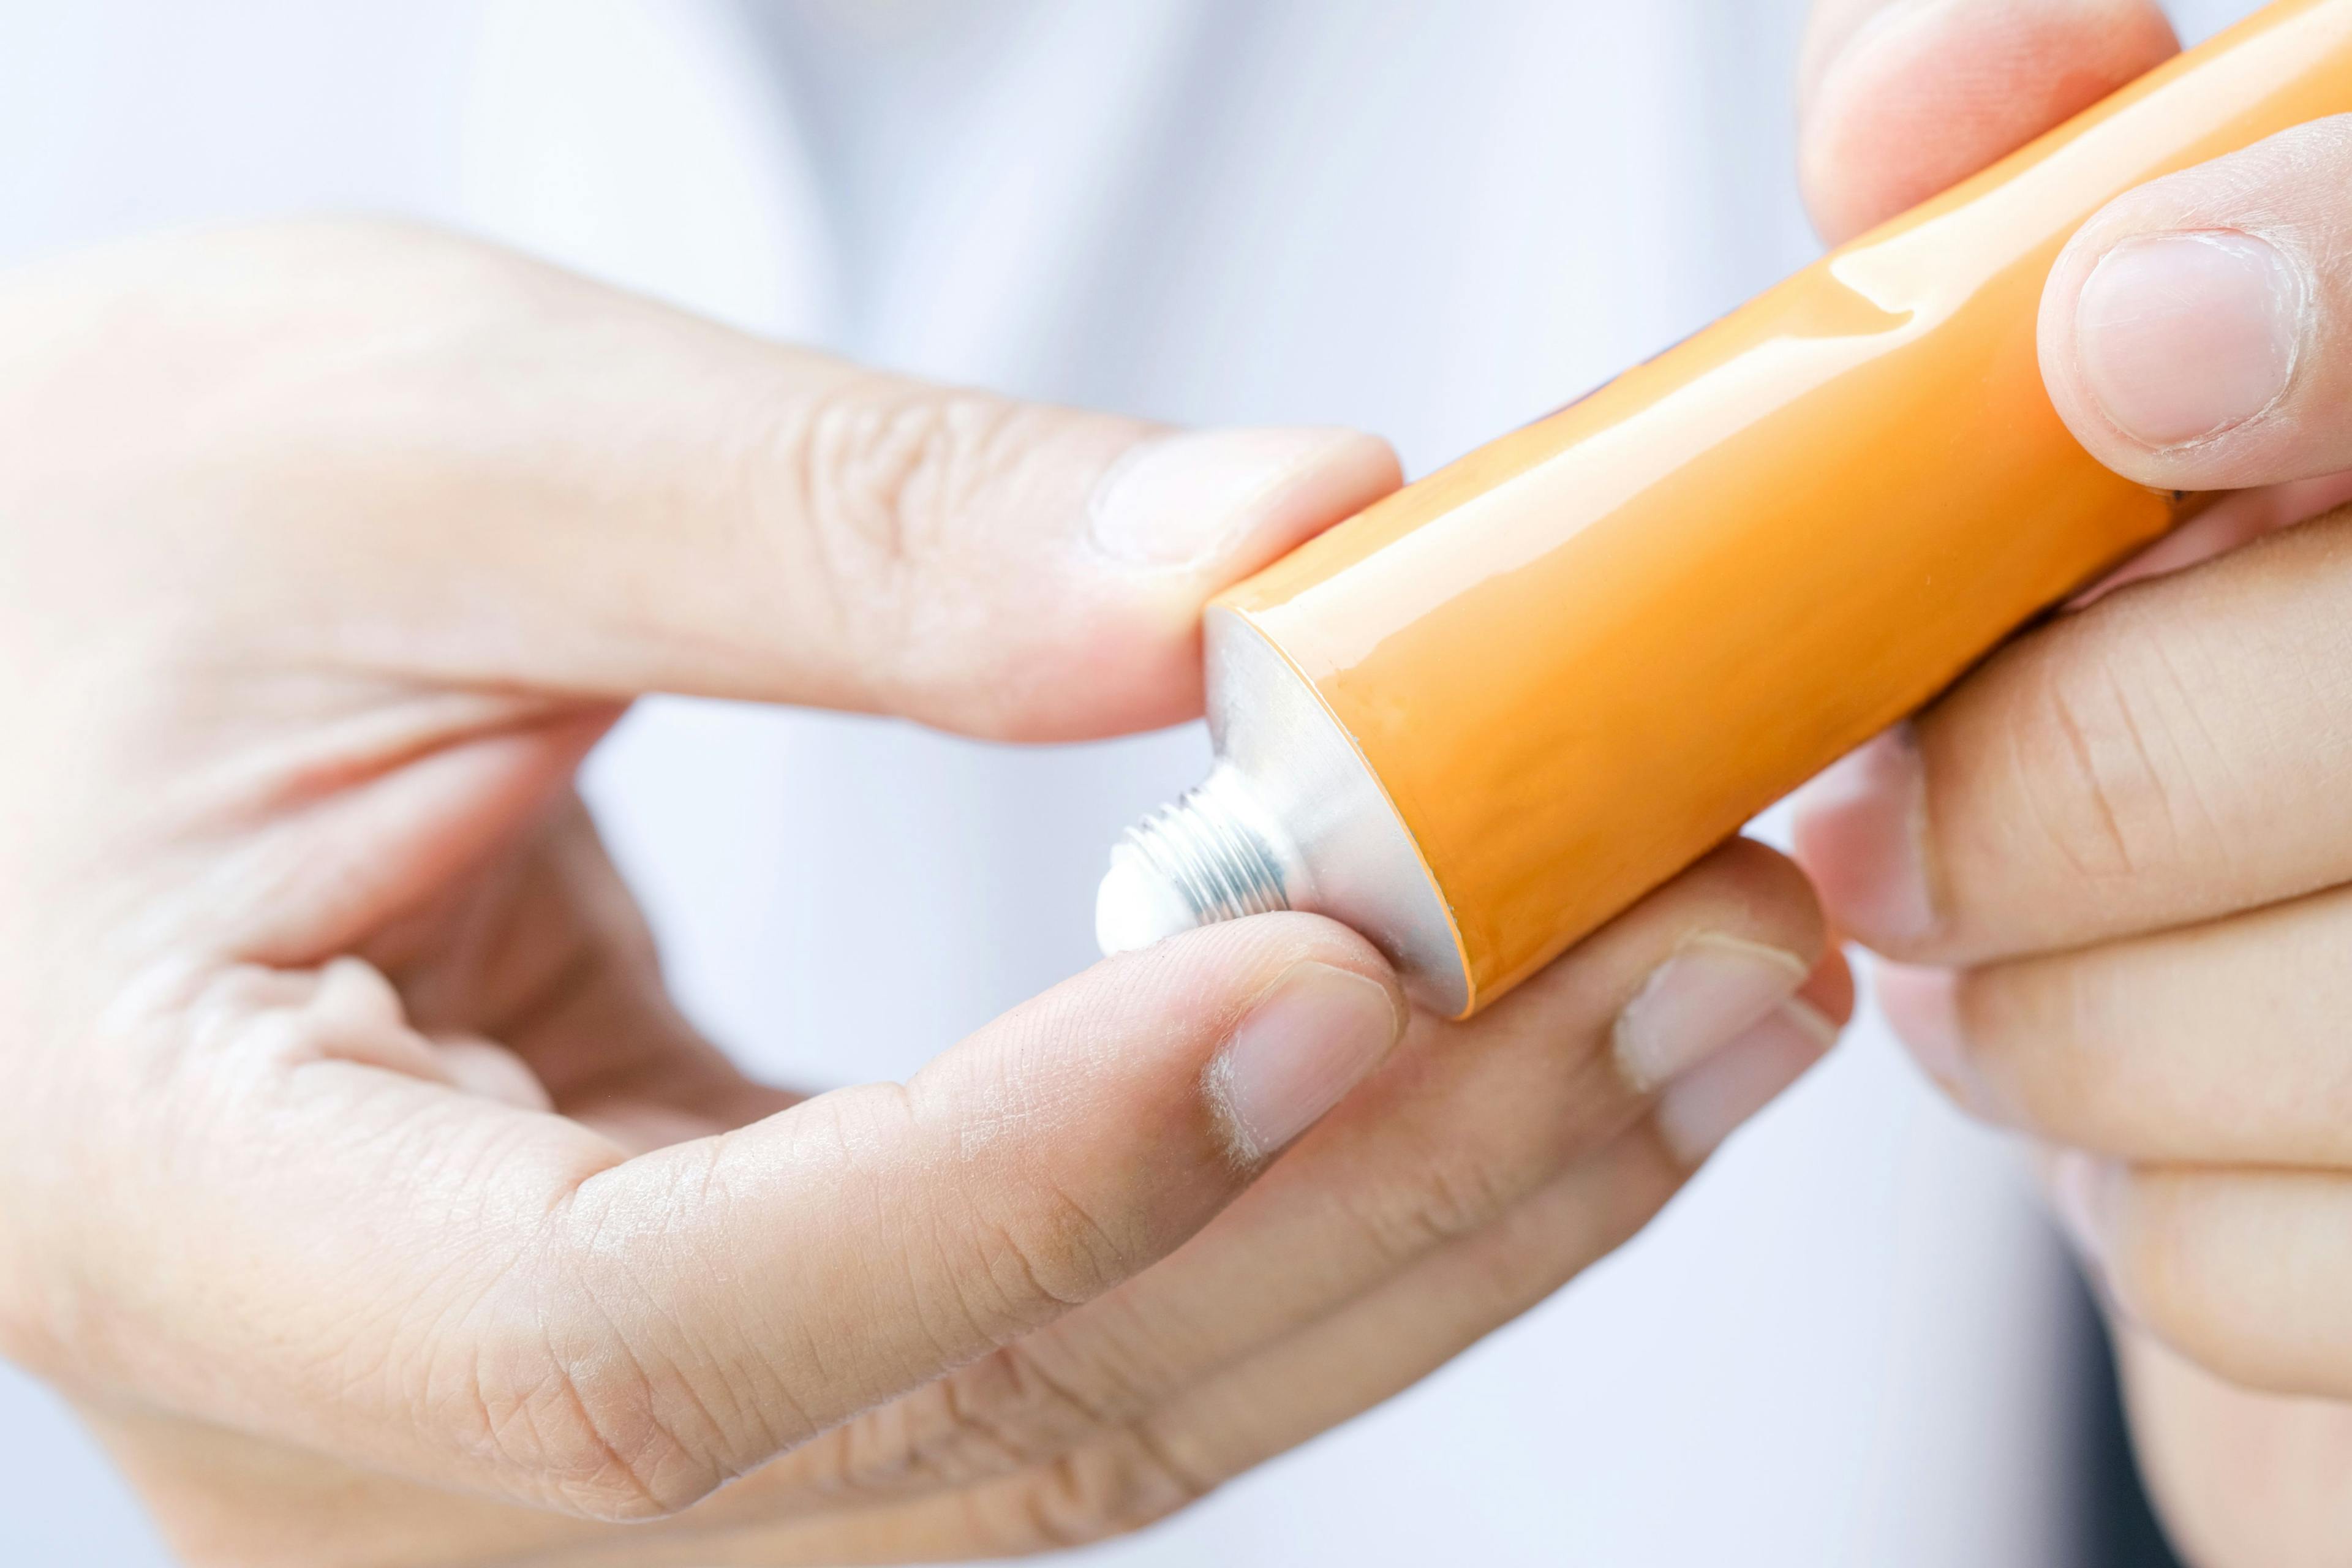 Study: Long-Term Use of Topical Corticosteroids Linked to Osteoporosis